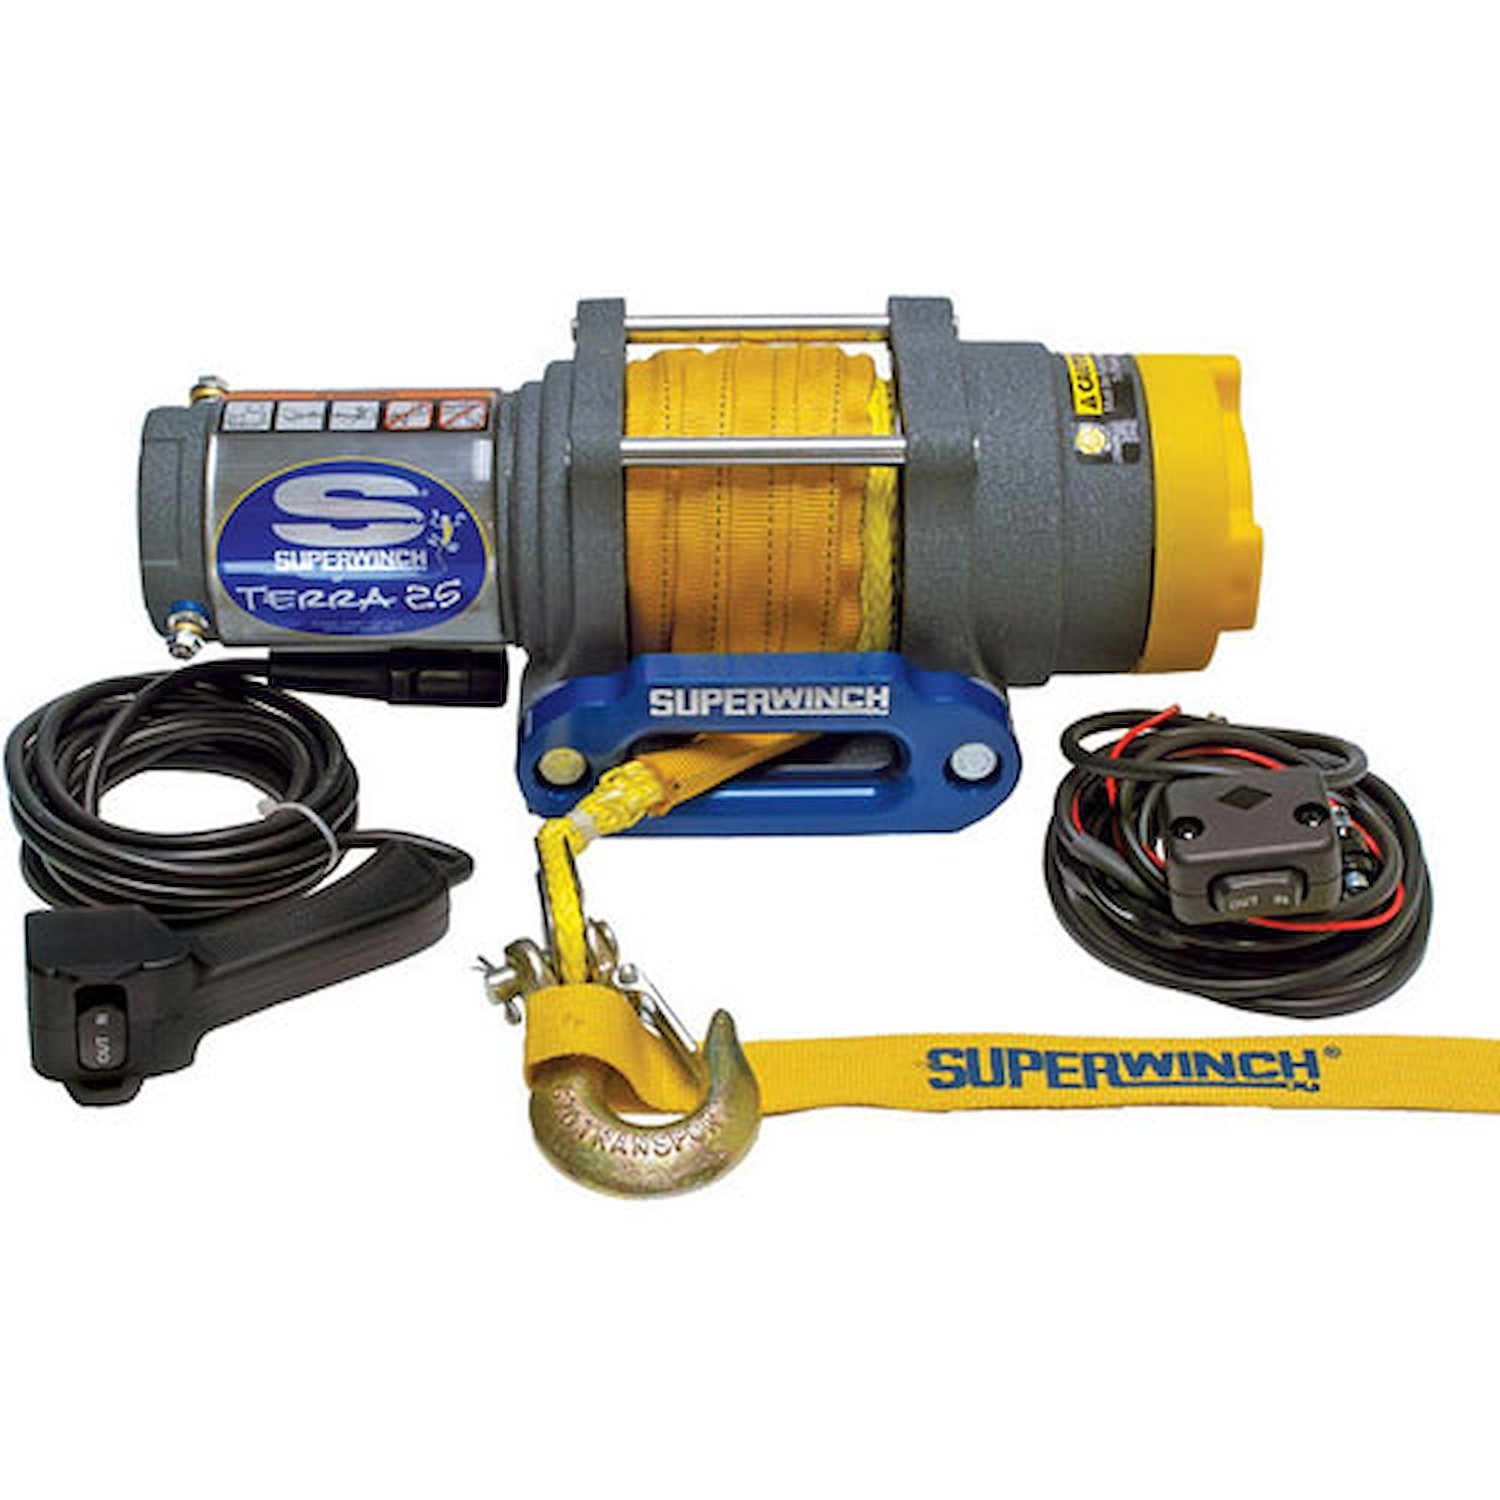 Terra 25SR Winch Rated Line Pull 2,500-lb.